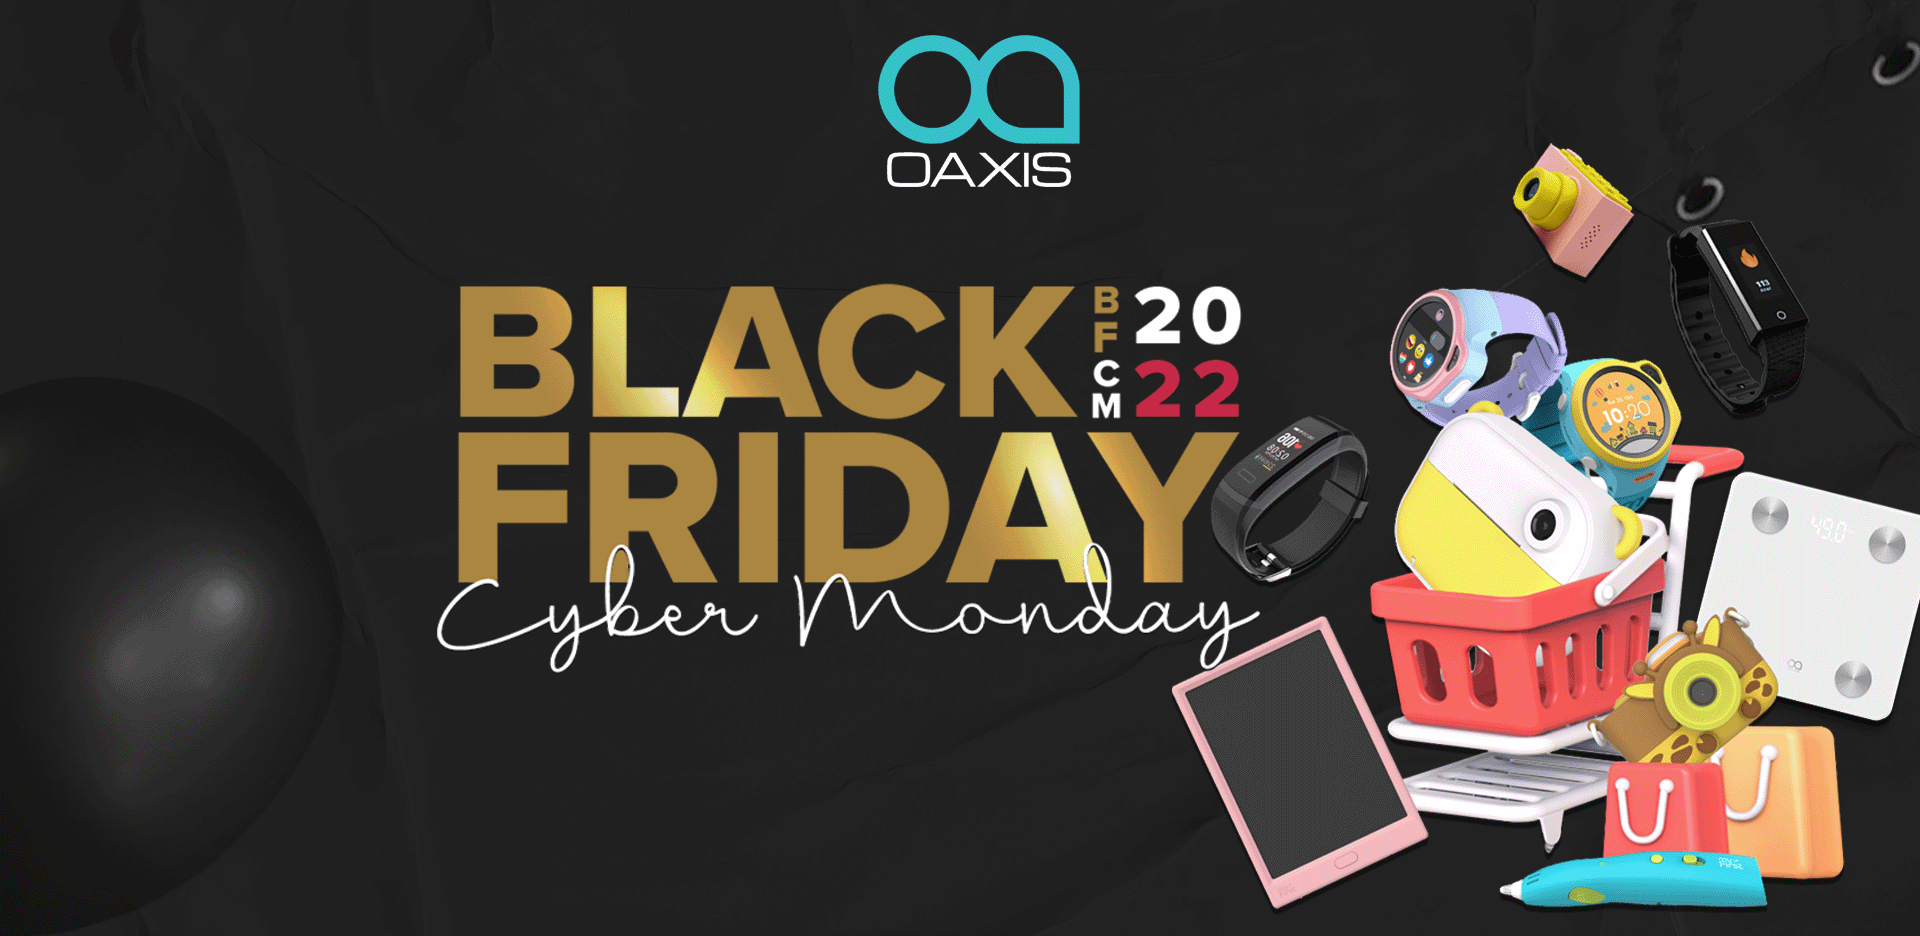 Get the Best of Black Friday Cyber Monday 2022 with OAXIS